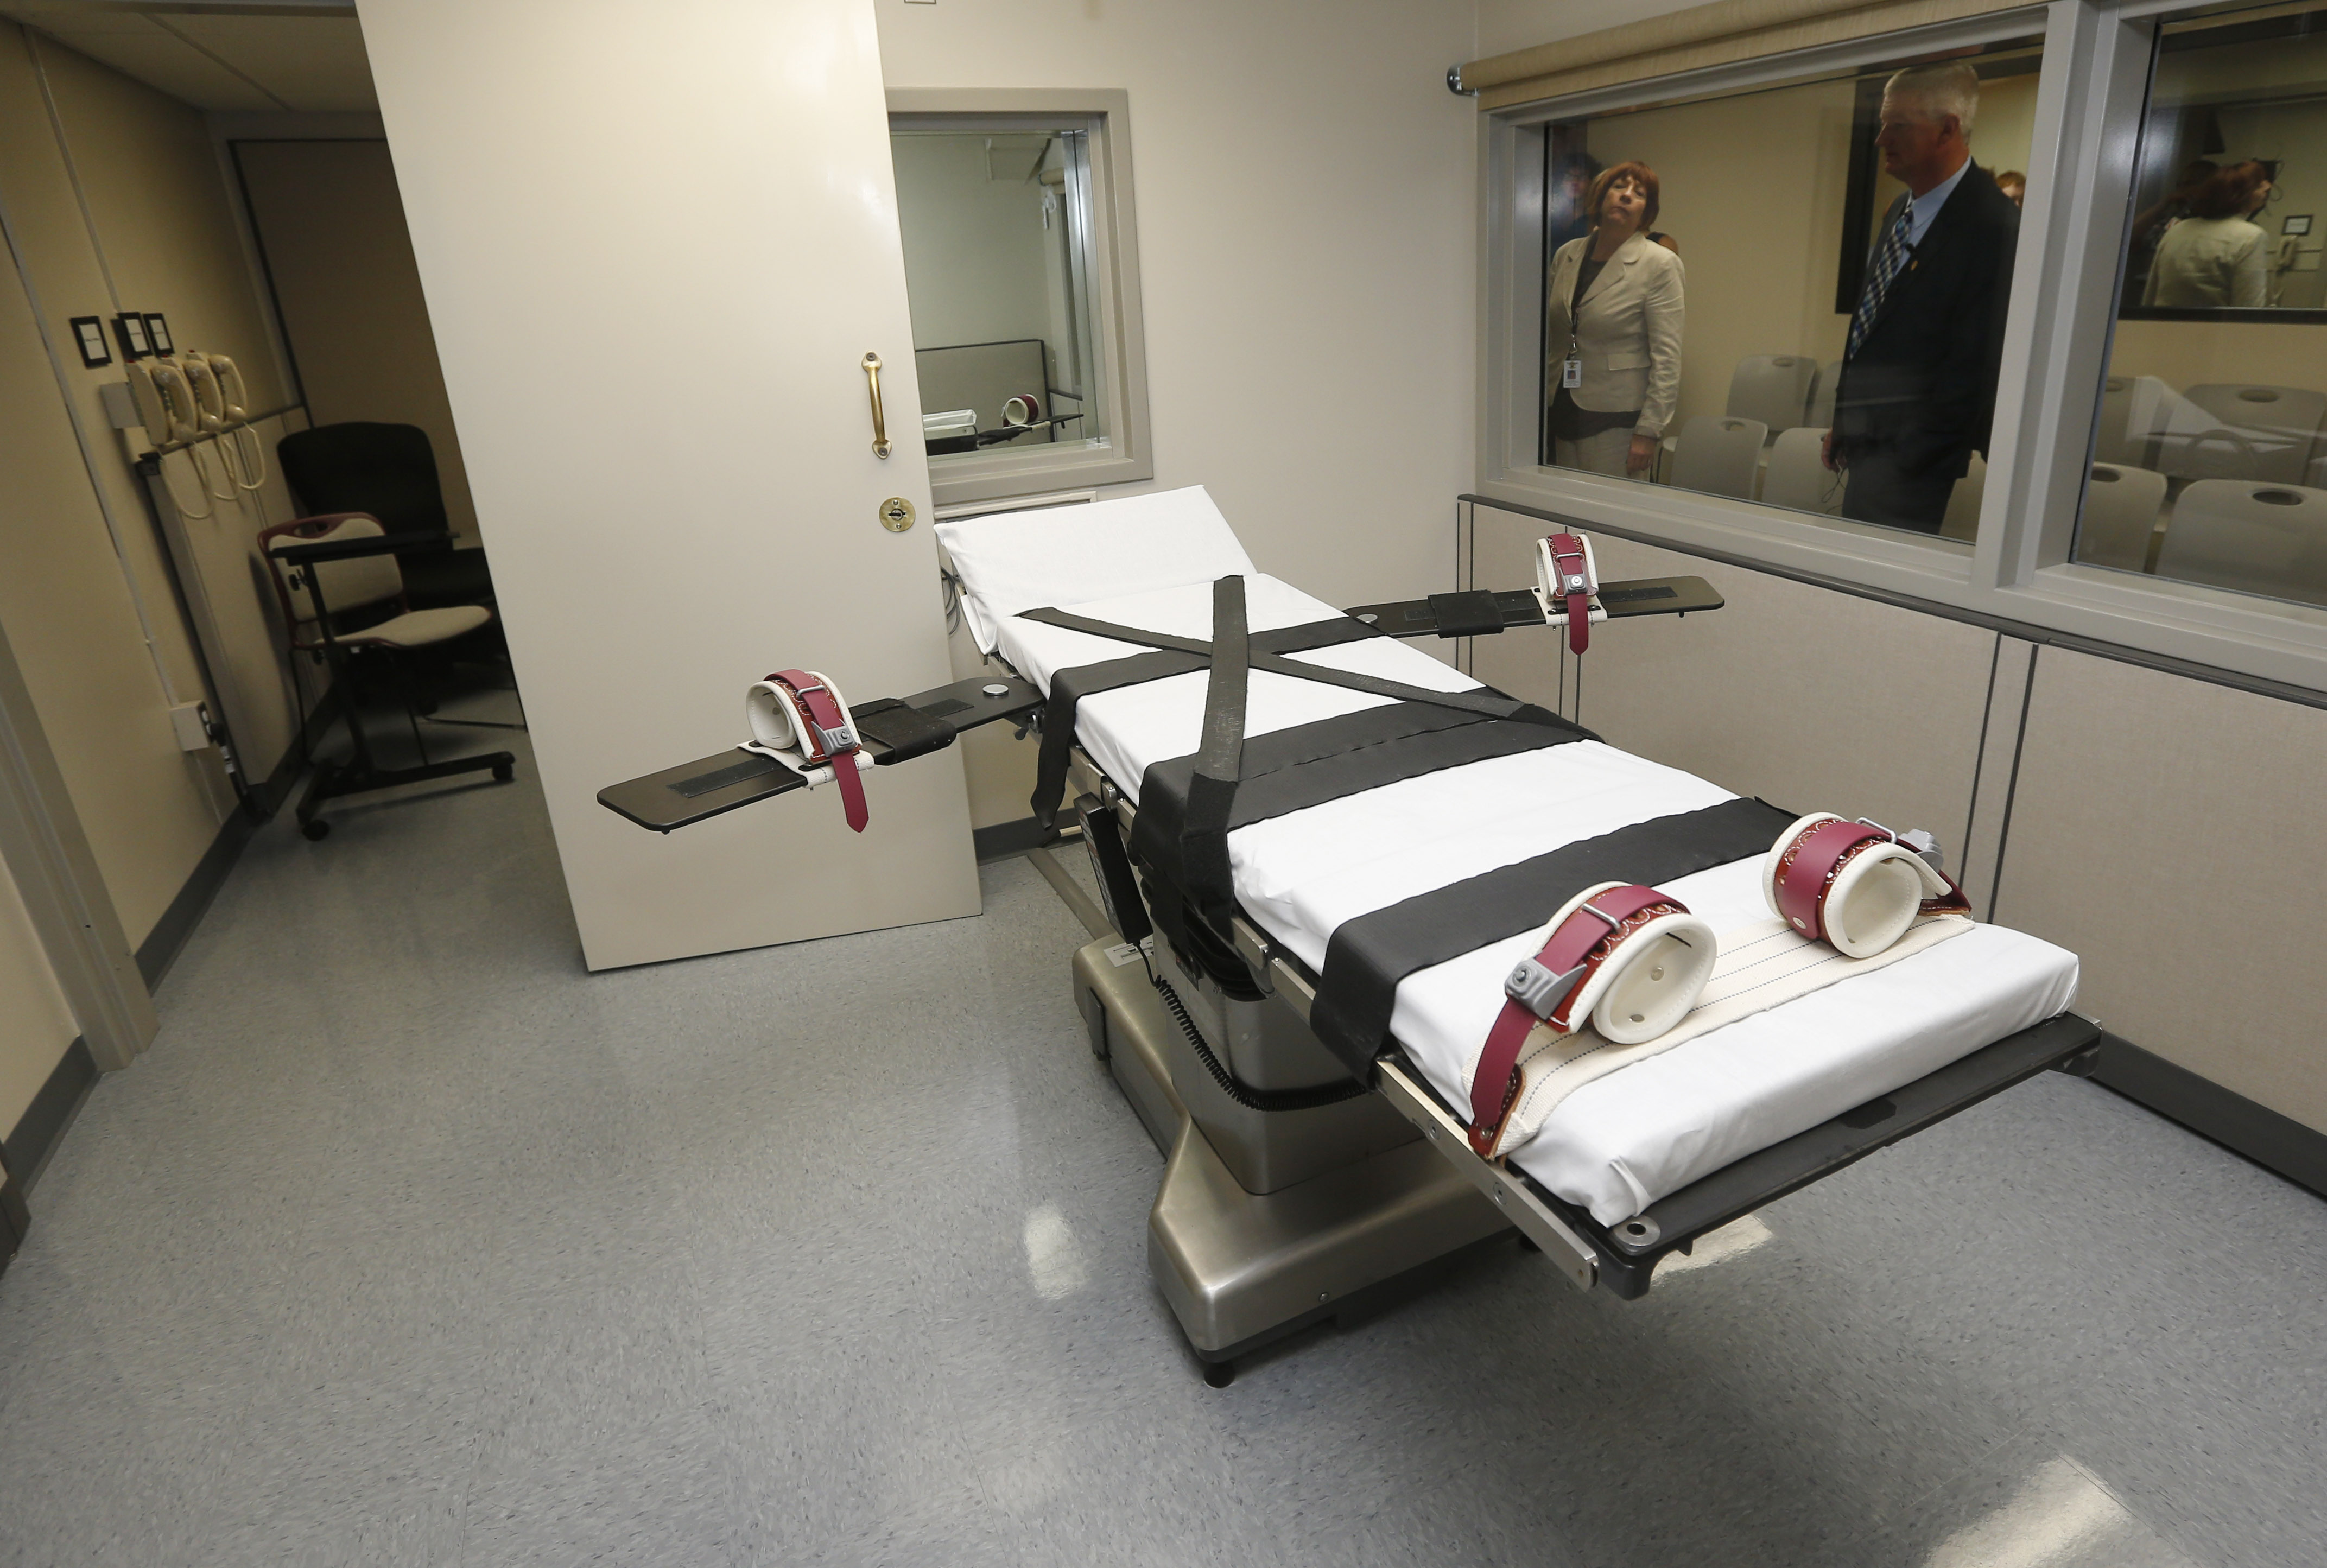 The death chamber at the Oklahoma State Penitentiary in McAlester, Okla., shown on Oct. 9, 2014. The Supreme Court upheld the state's lethal injection protocol on June 29, 2015 (Sue Ogrocki—AP)